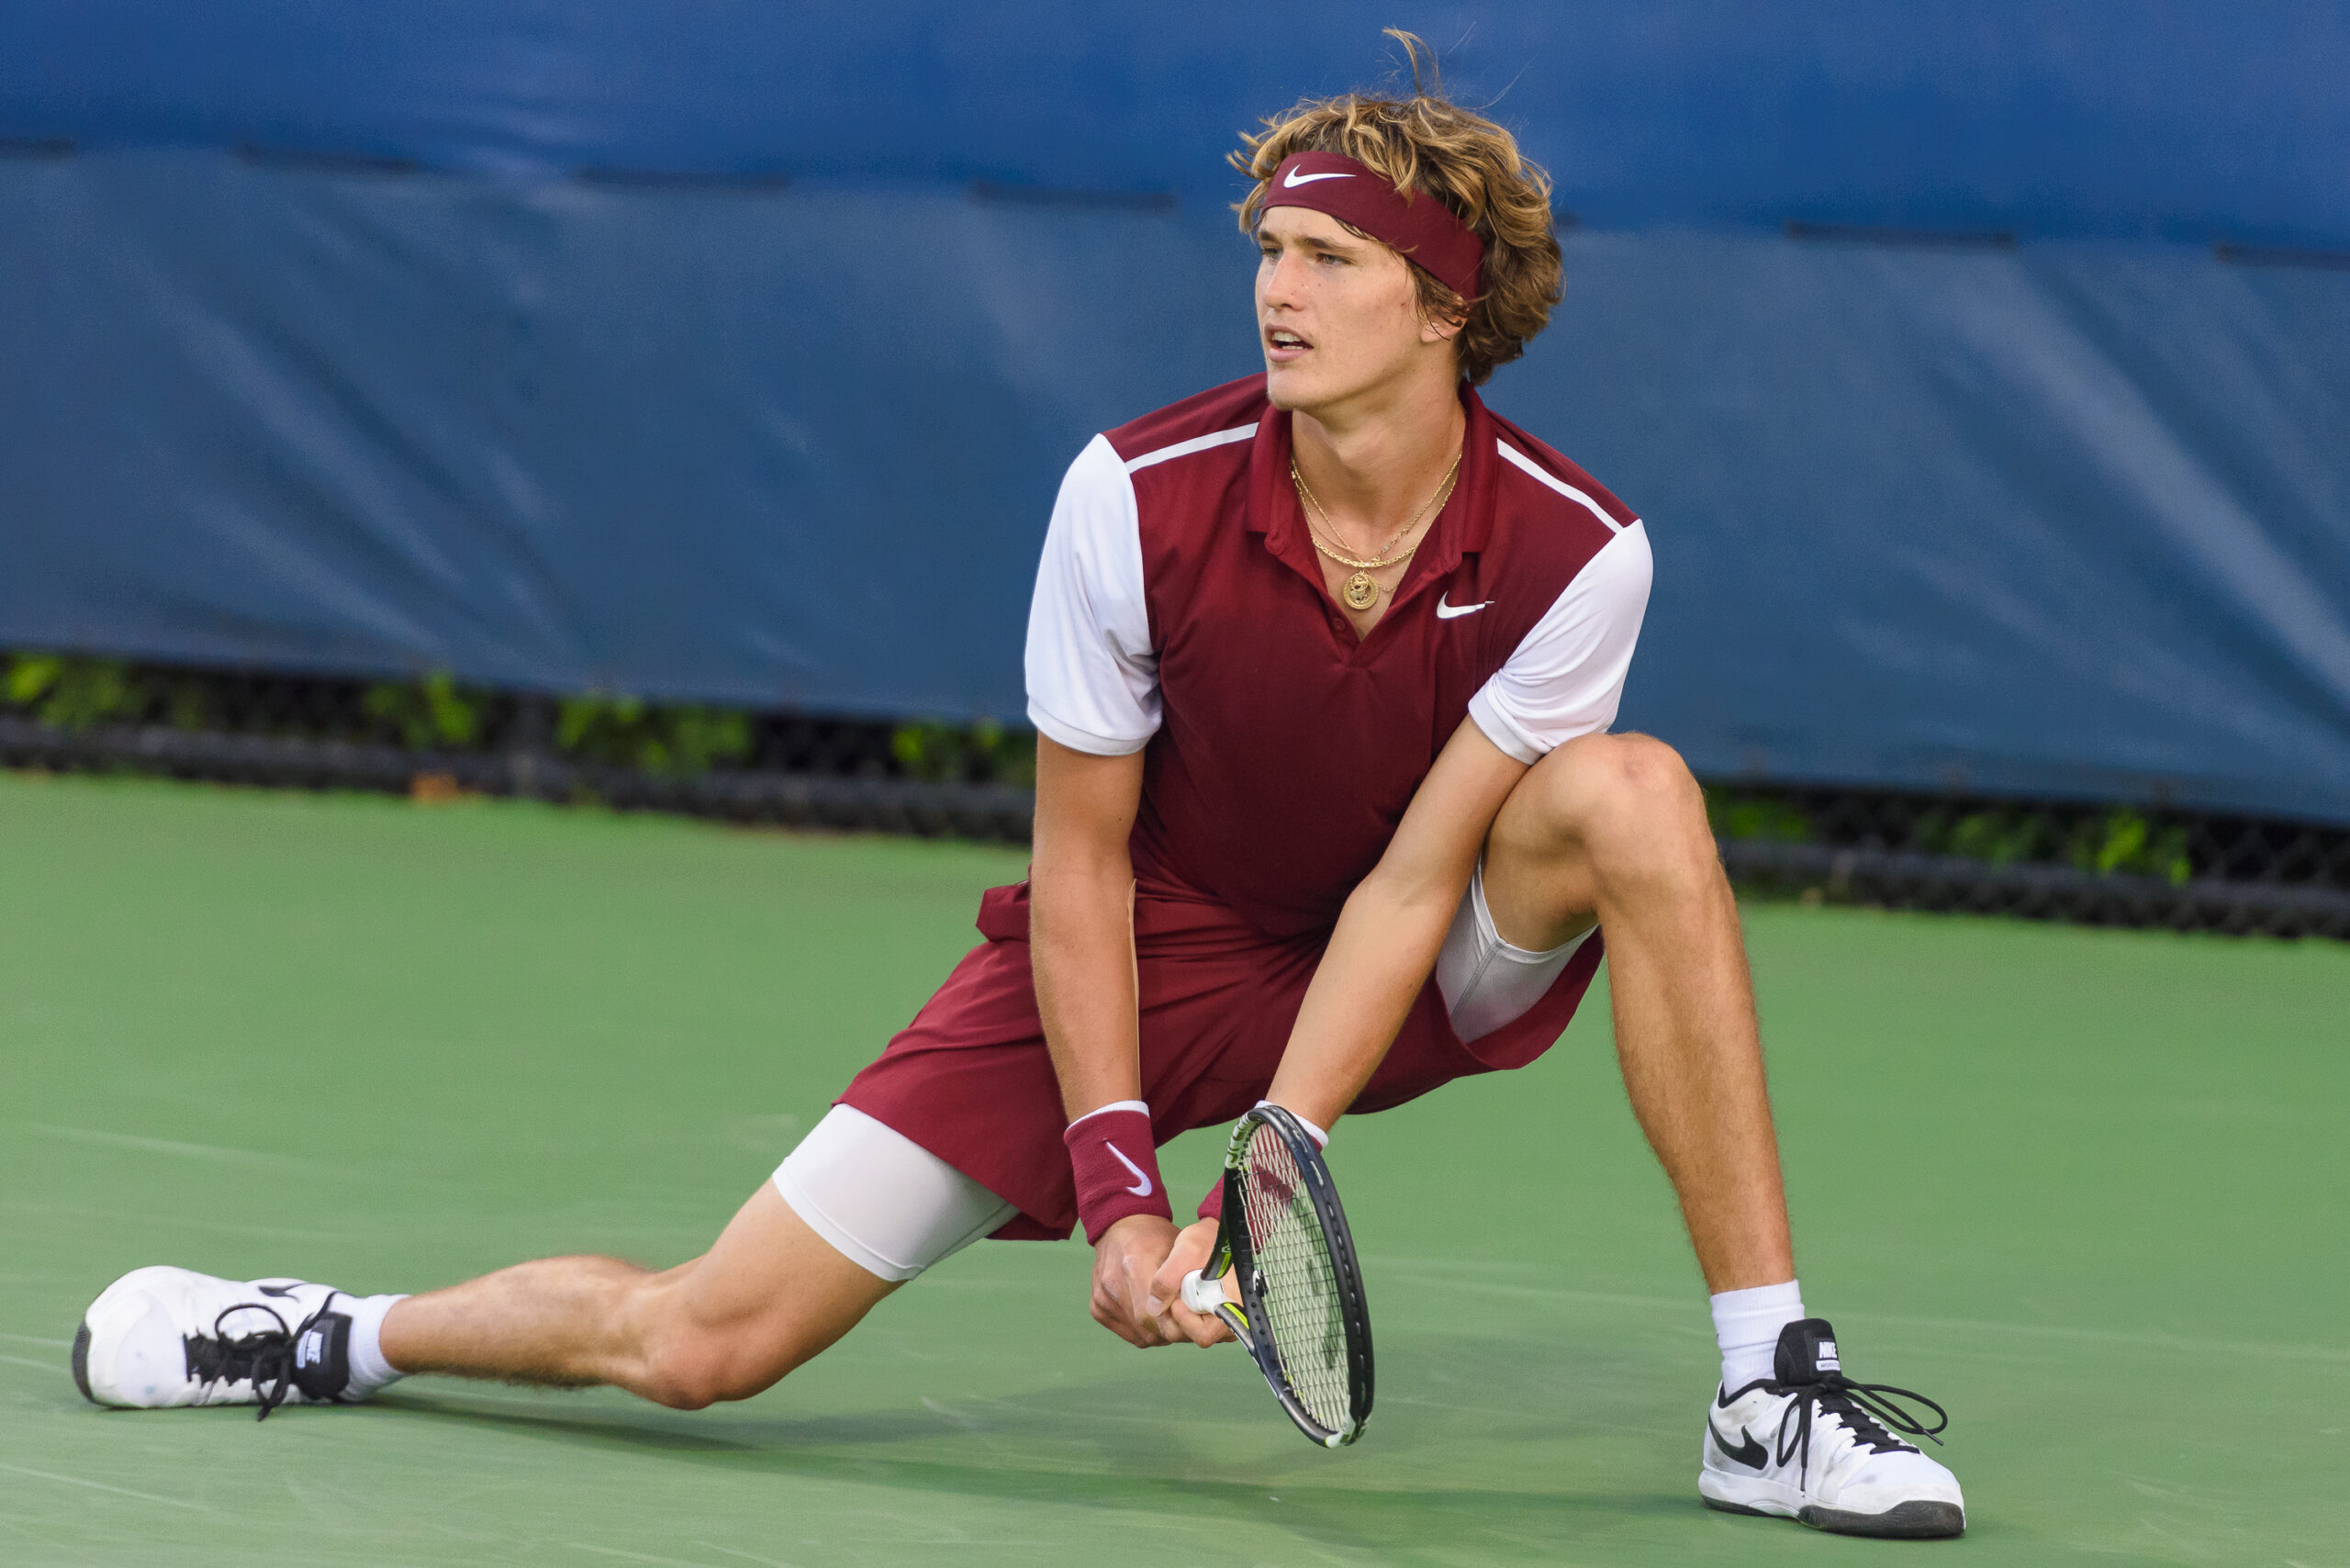 Alexander Zverev withdraws from the 2022 United States Open